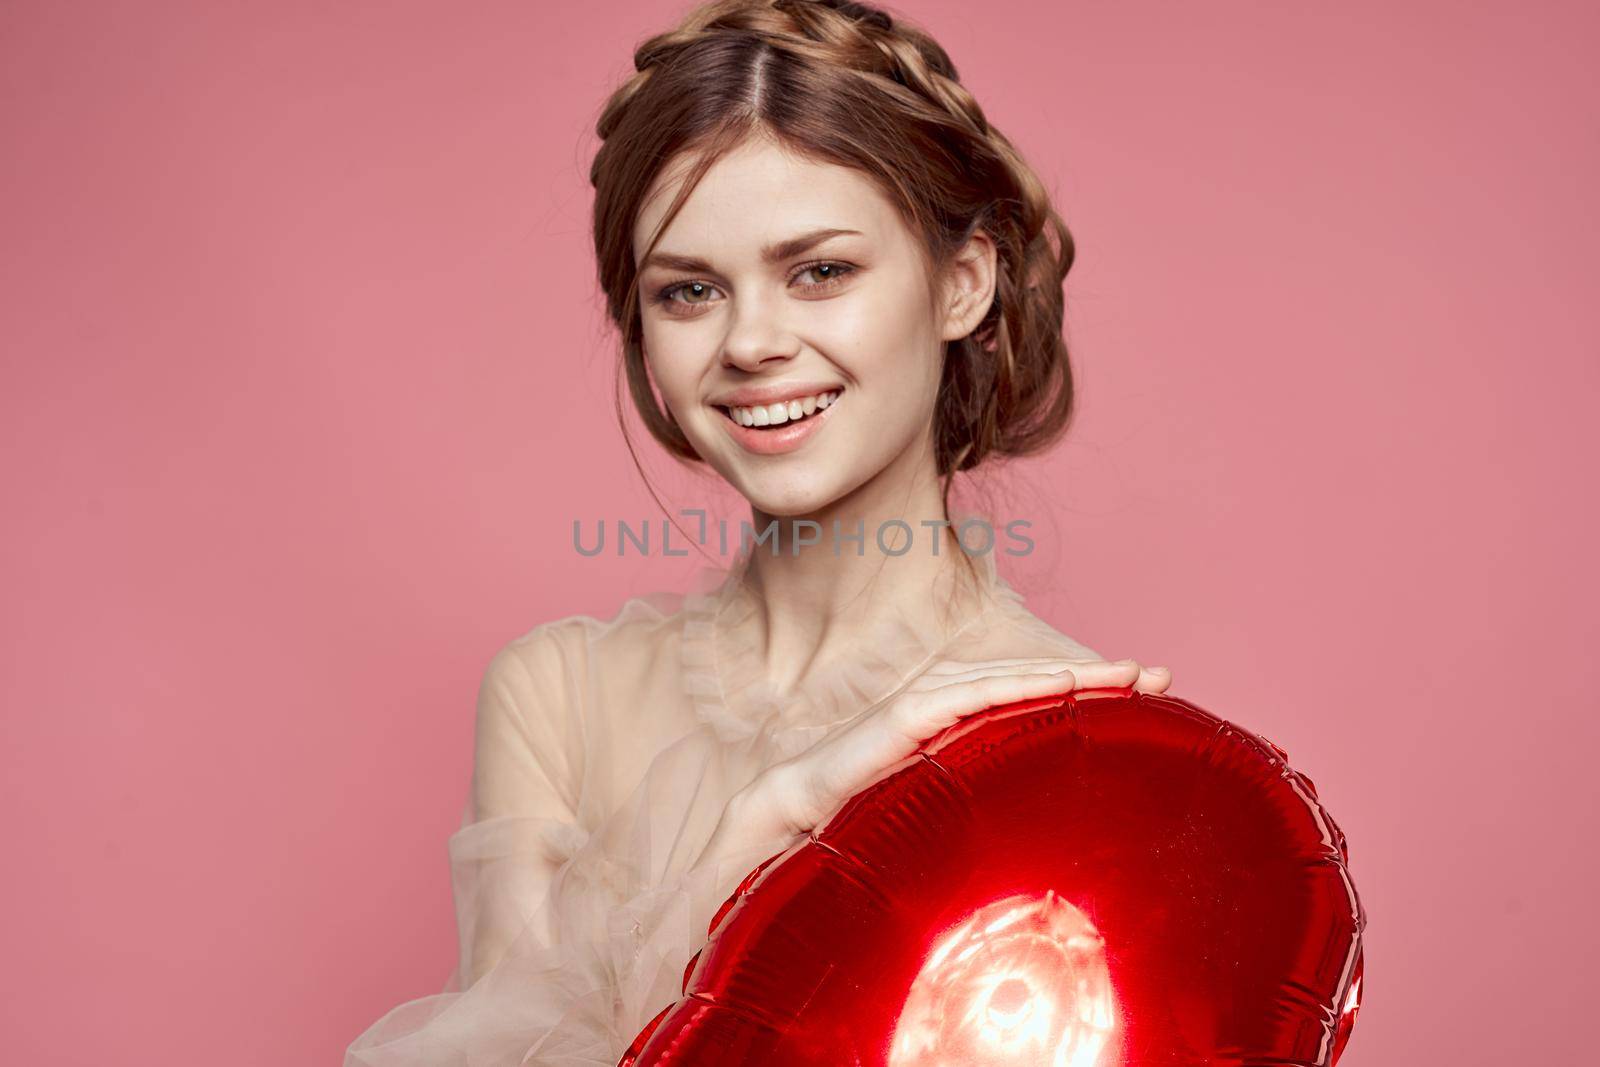 beautiful woman in a dress balloon Valentine's Day model studio. High quality photo